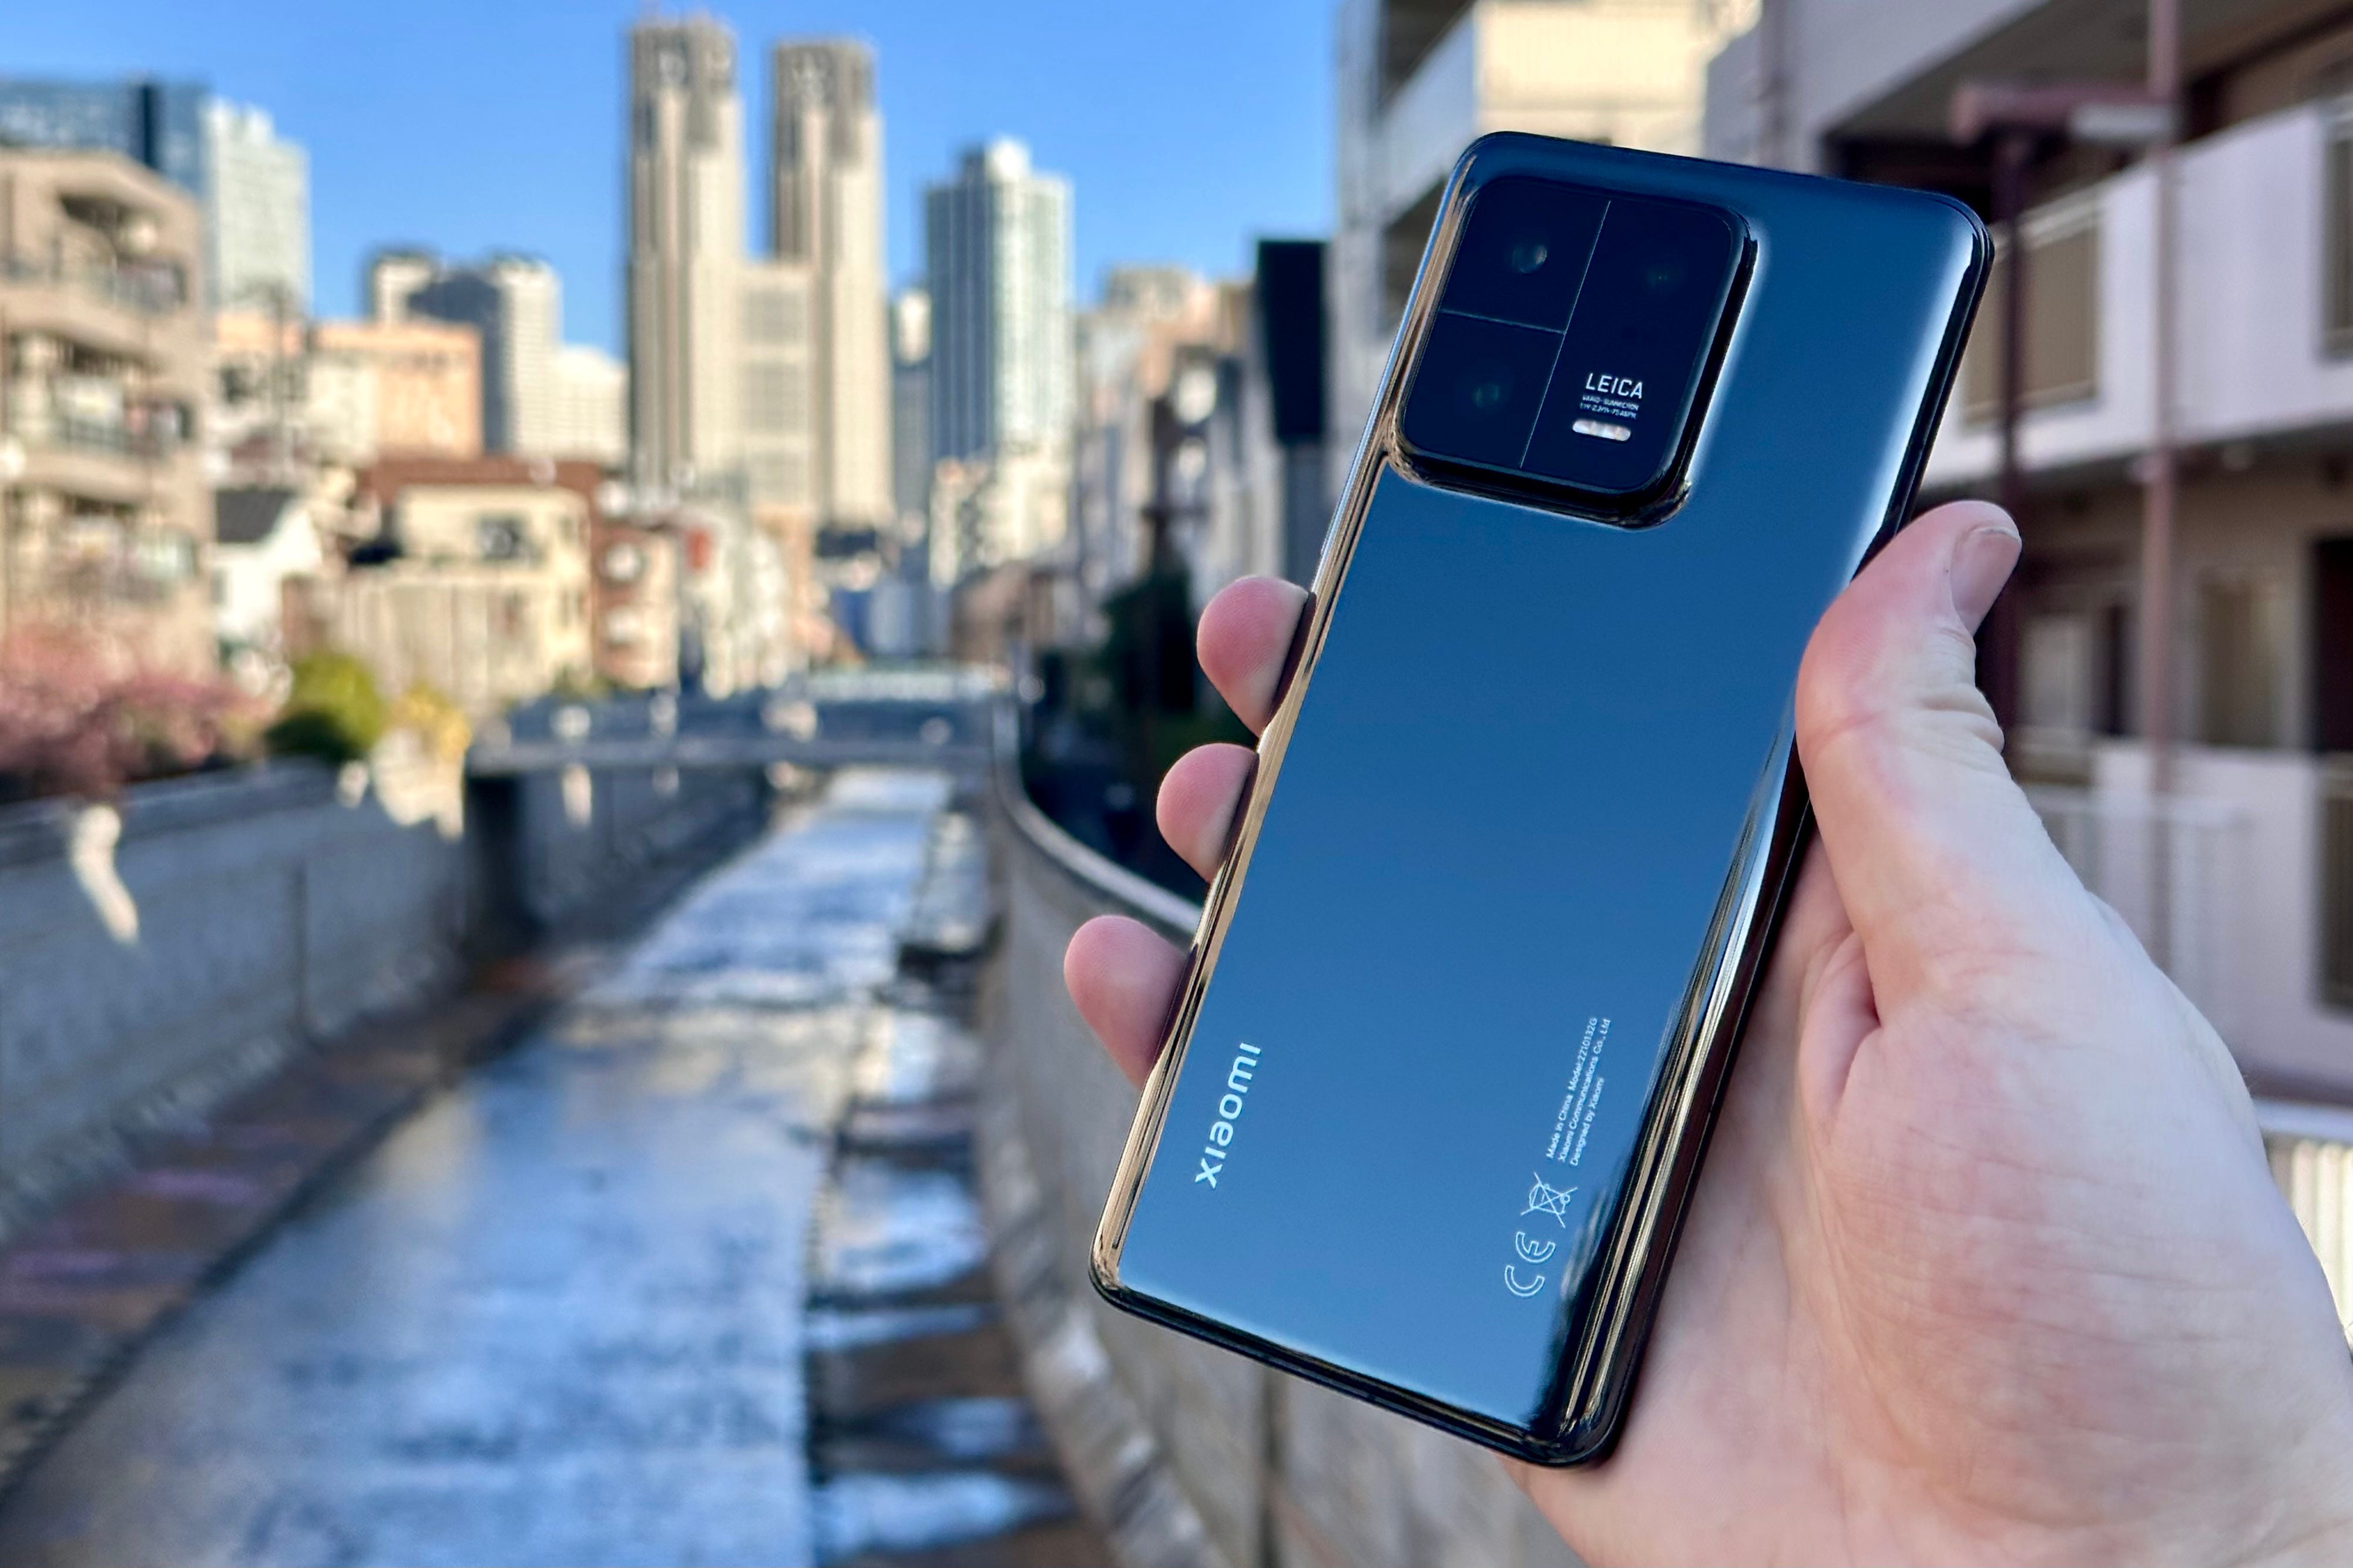 Hands on: Xiaomi 13 Pro review – a camera-led flagship for the world